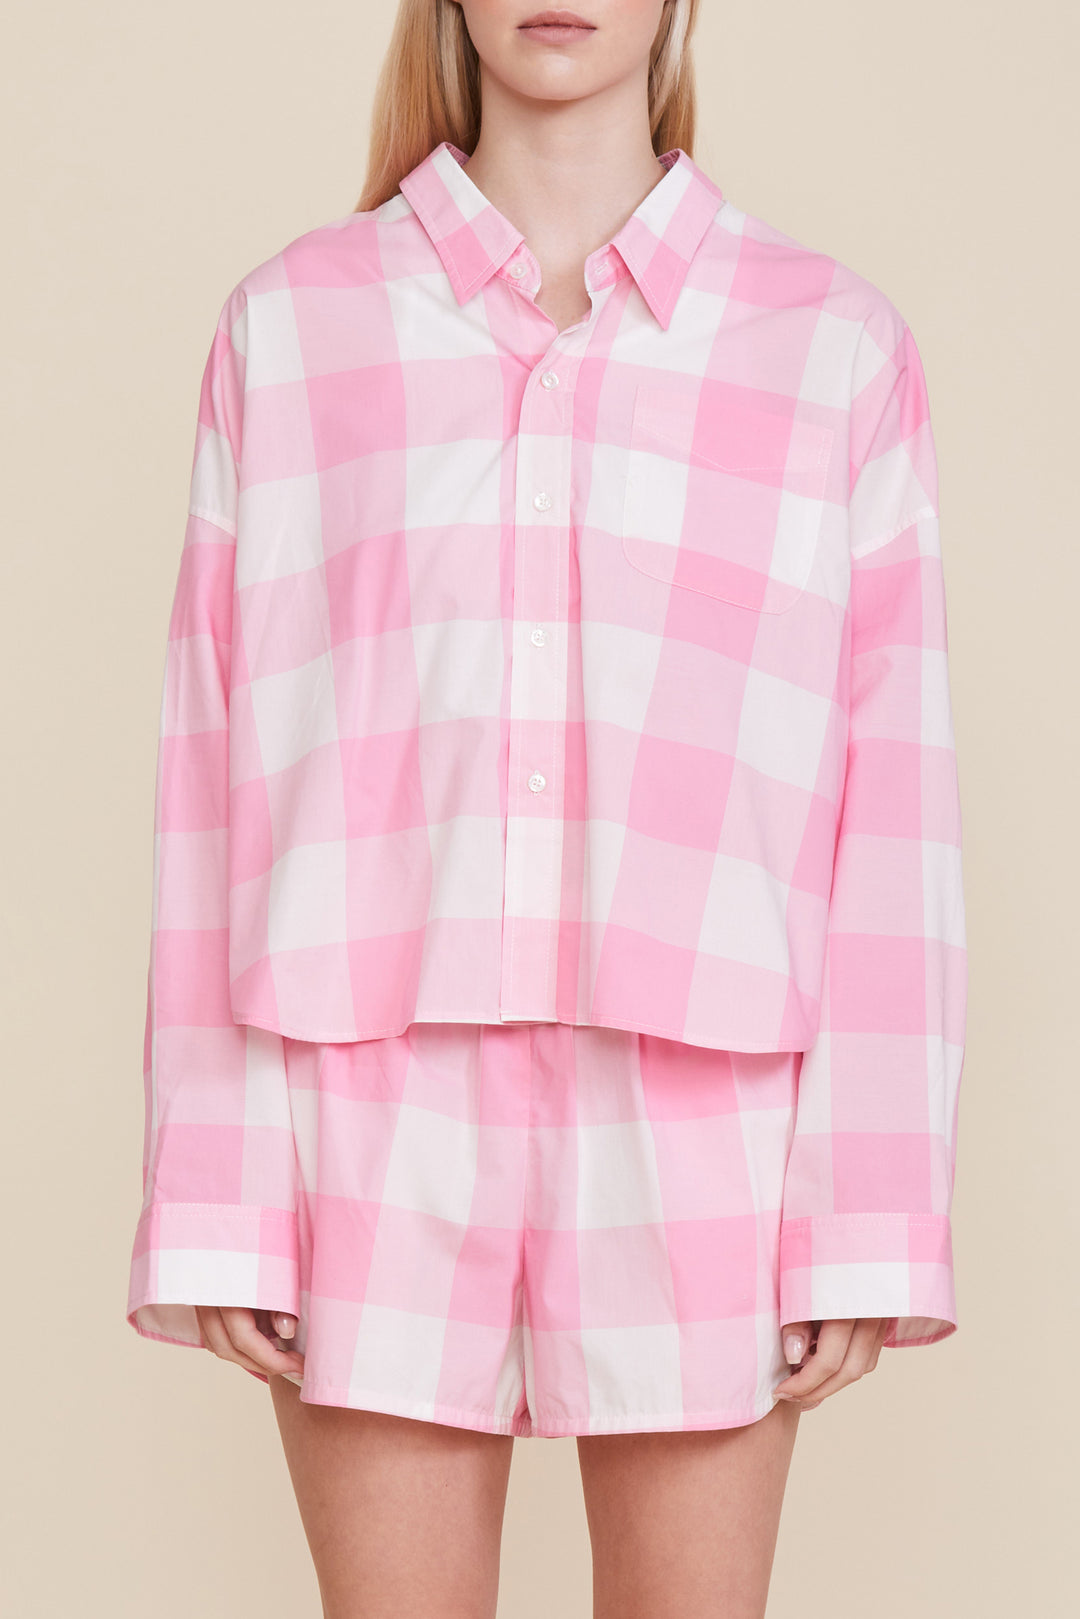 Cropped Button Front Shirt - Pink Gingham